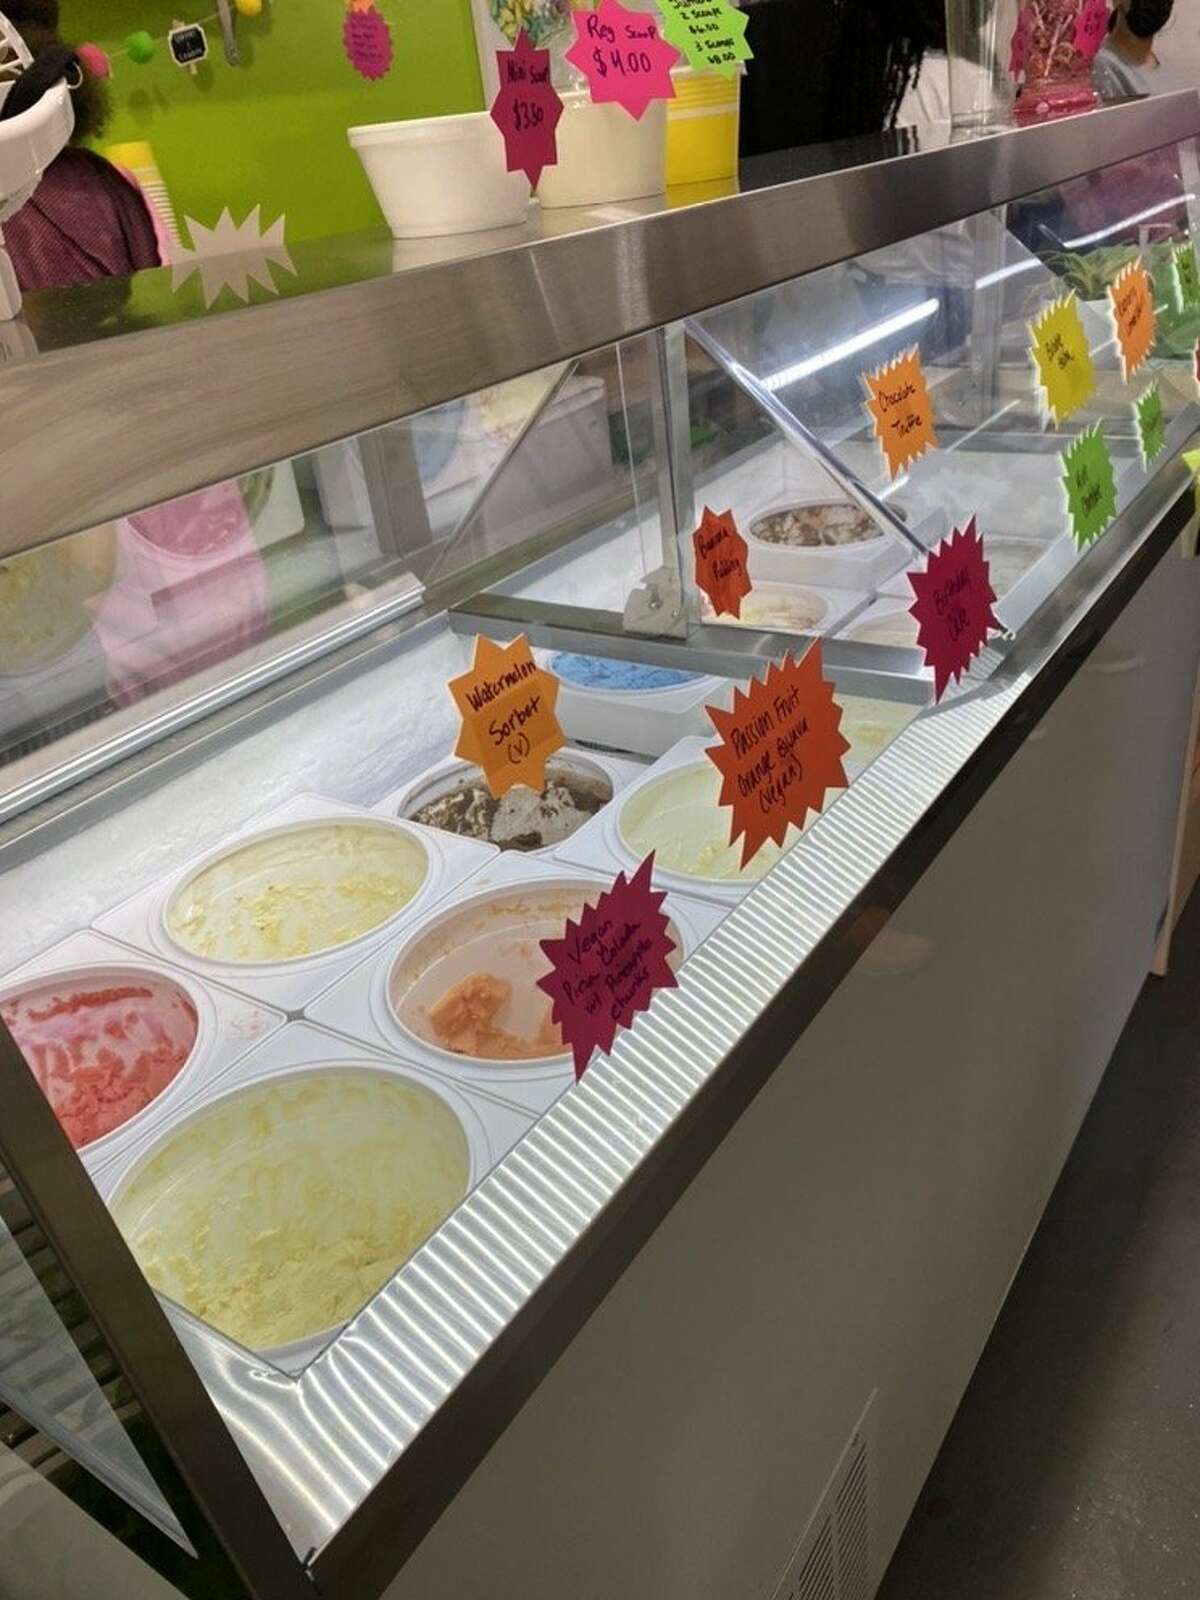 Ice cream flavors on display at Creamy Cone Cafe.